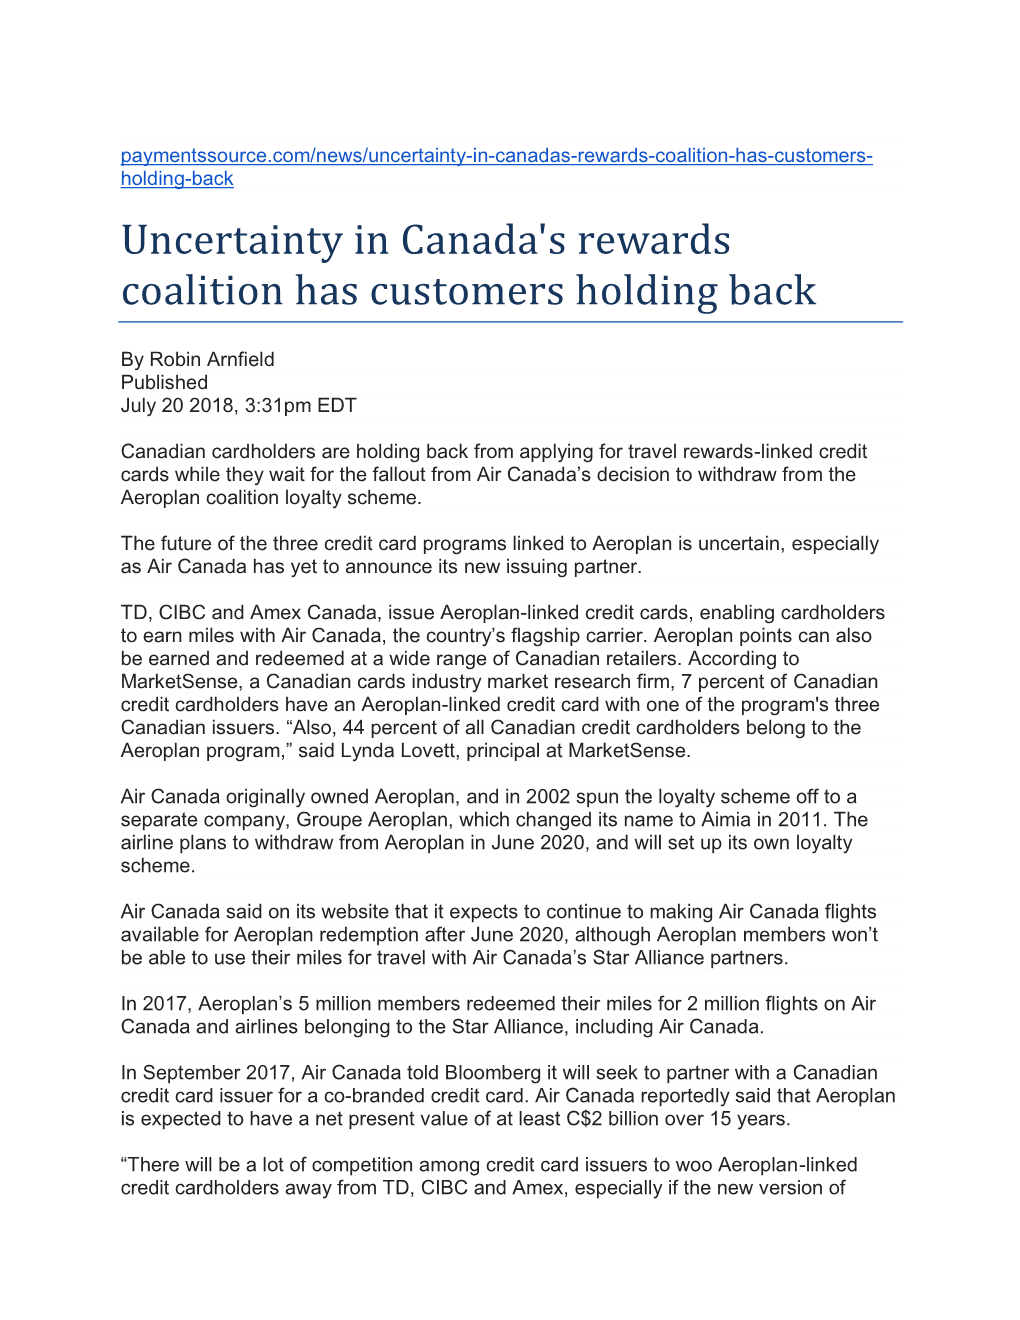 Uncertainty in Canada's Rewards Coalition Has Customers Holding Back